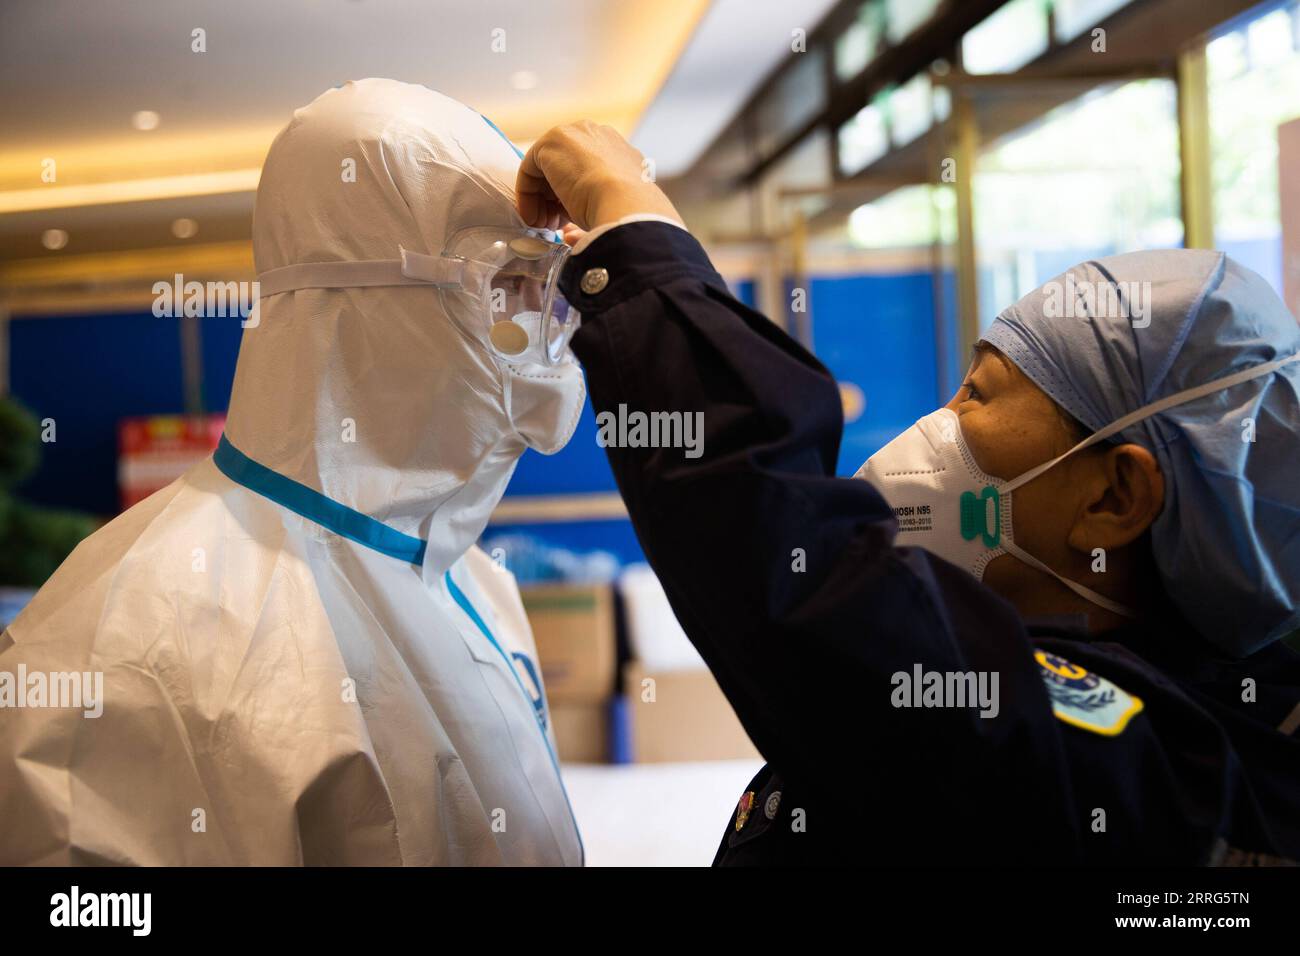 220510 -- SHANGHAI, May 10, 2022 -- Zhang Ying R helps Meng Xiangjun wear protective suit at the headquarters of a medical emergency team on Caoyang Road in east China s Shanghai, May 9, 2022. A medical emergency team consisting of 108 members with 50 ambulances from north China s Tianjin has arrived at Shanghai to assist in the city s public medical emergency service amid the COVID-19 resurgence.  CHINA-SHANGHAI-MEDICAL TEAM-COVID-19-AID CN JinxLiwang PUBLICATIONxNOTxINxCHN Stock Photo